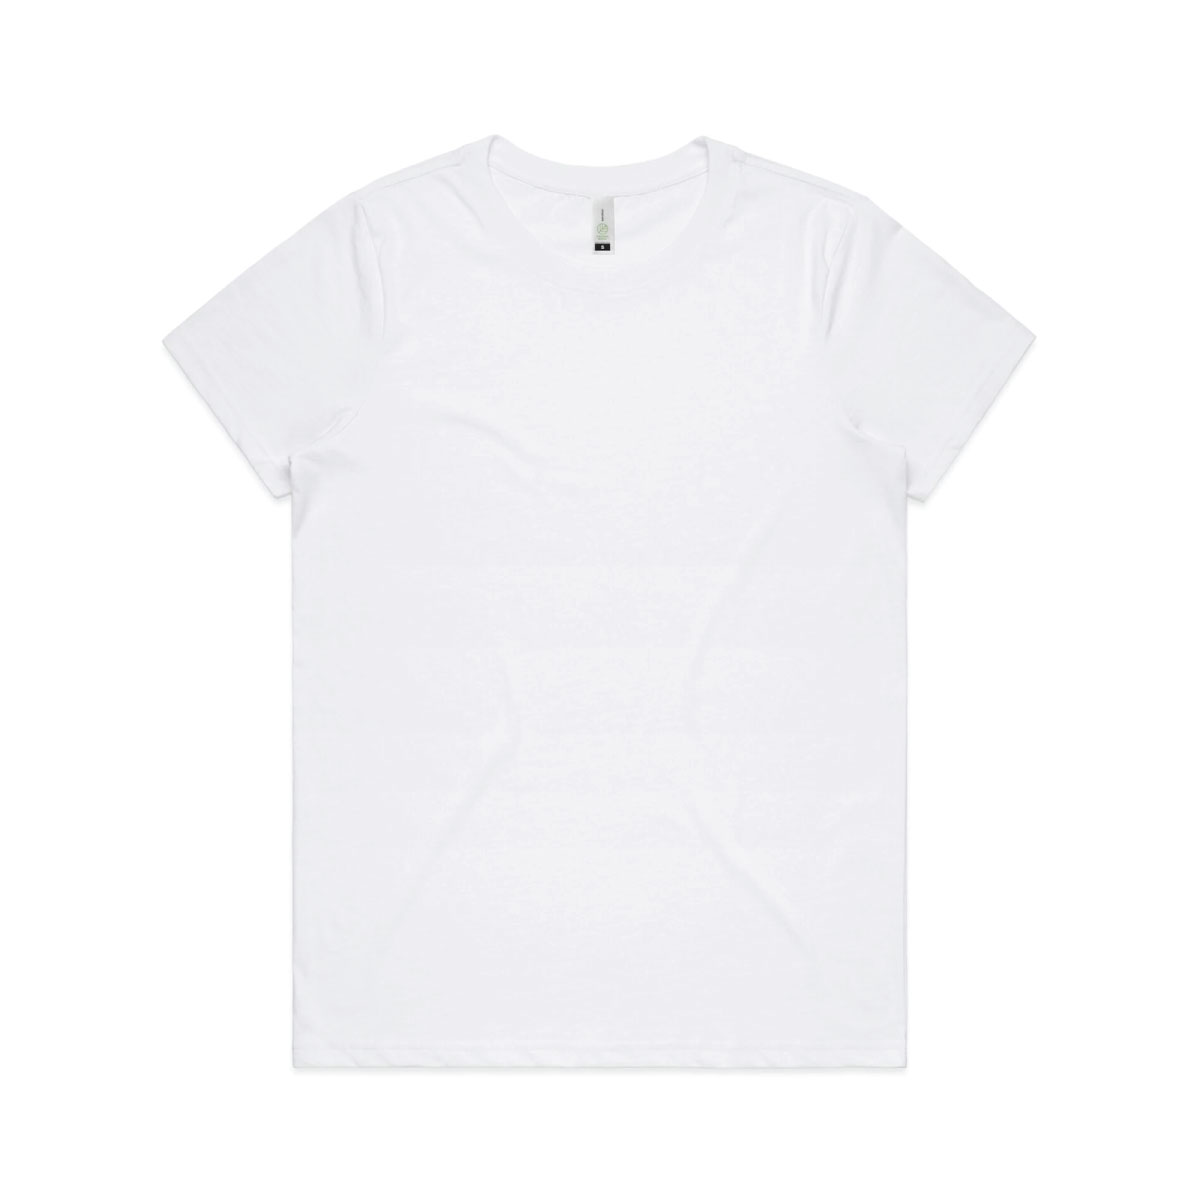 Promotional AS Colour Maple Organic Tee | Promotion Products